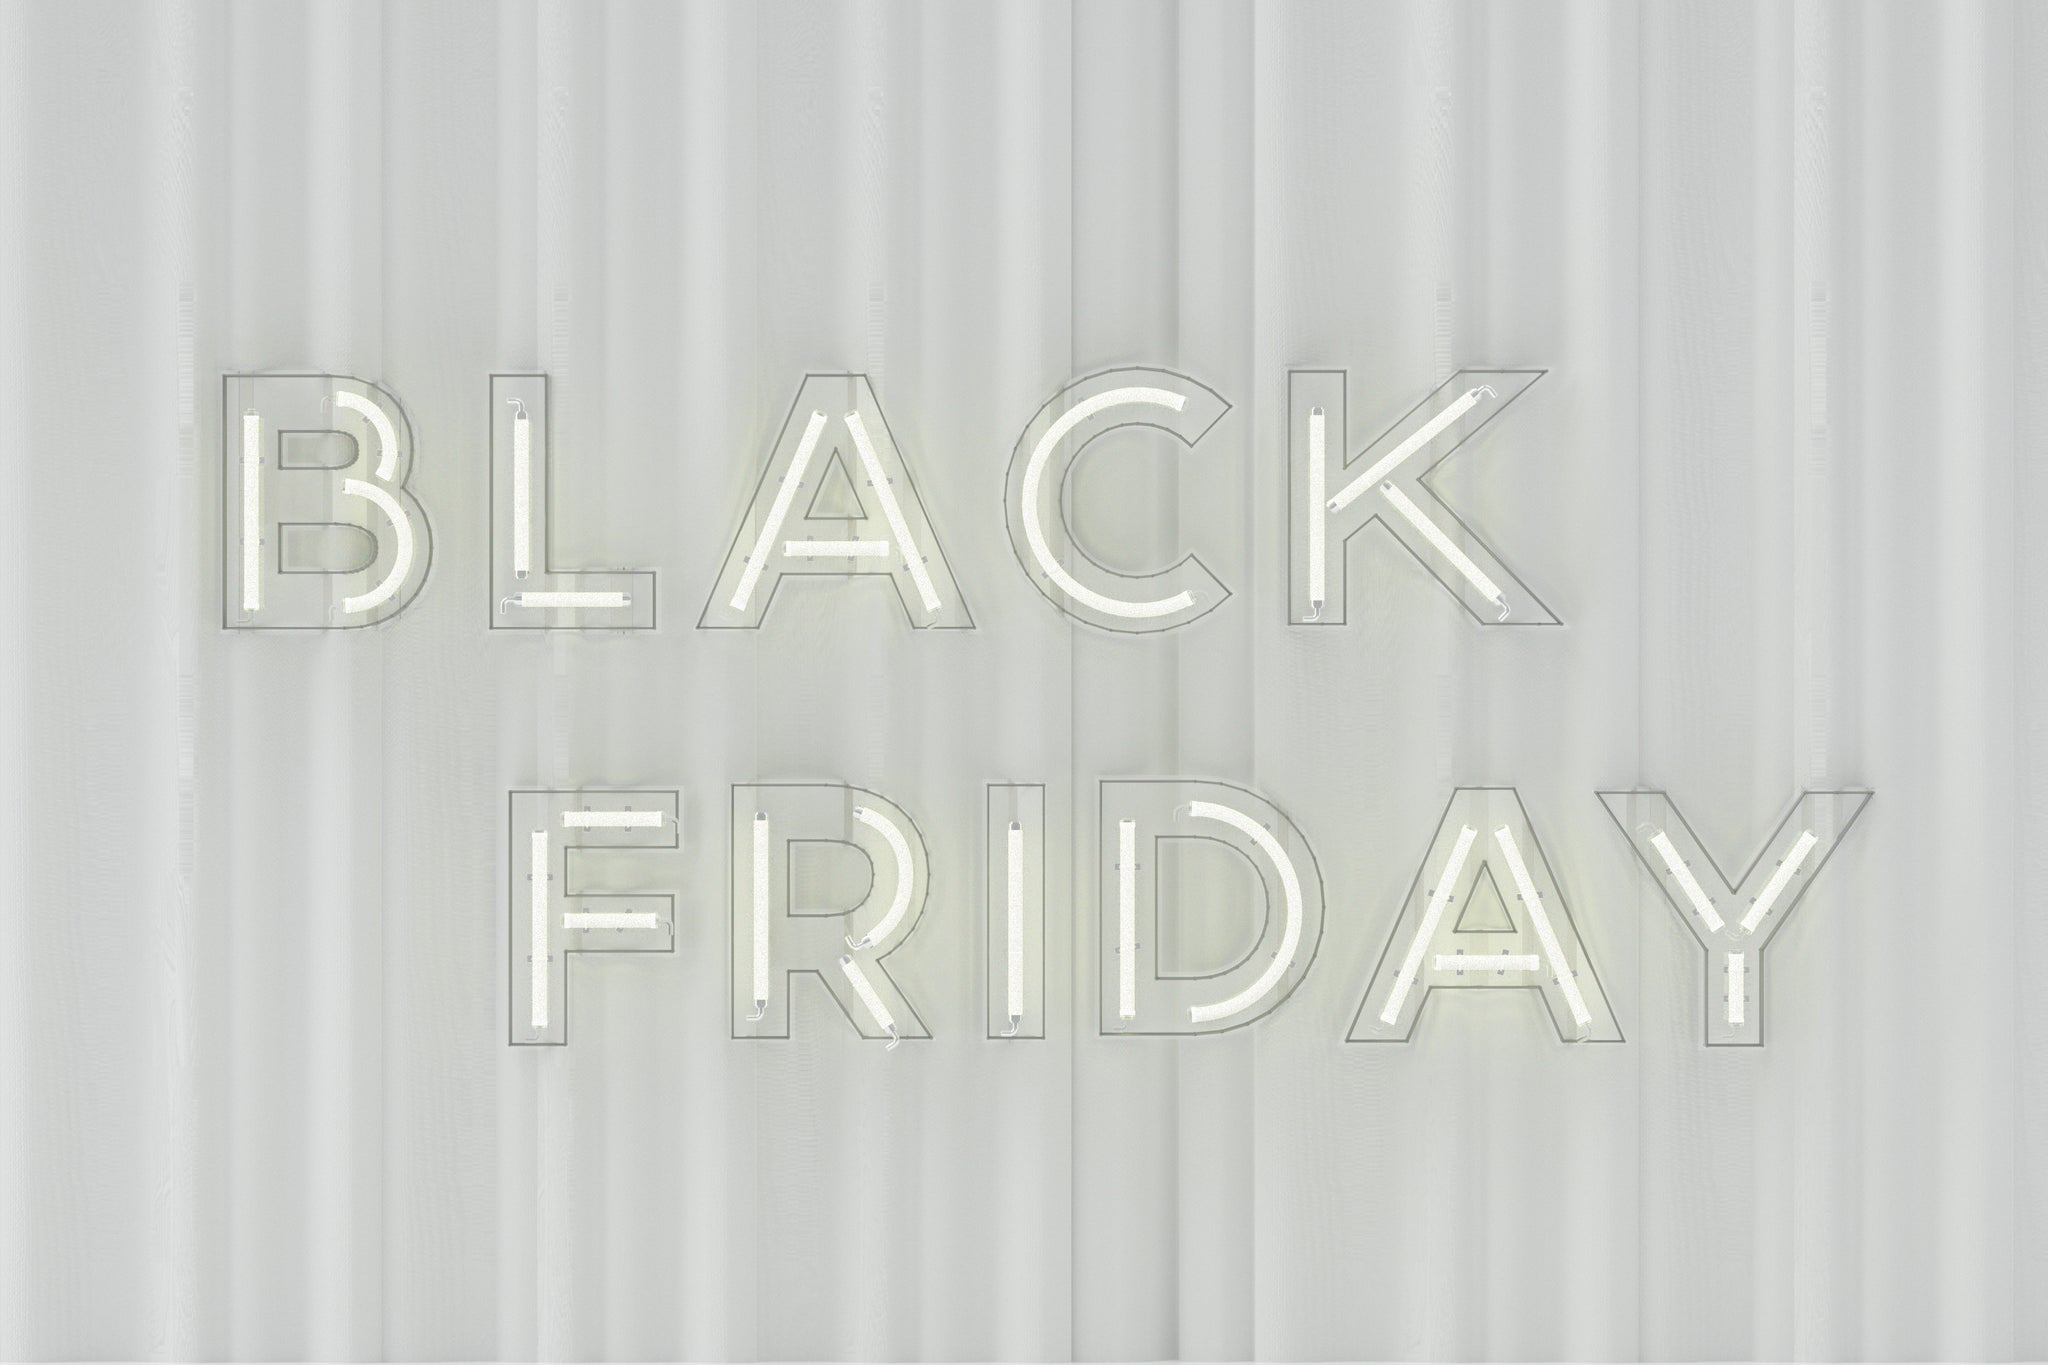 Black Friday Must-Buy Holiday Gift List